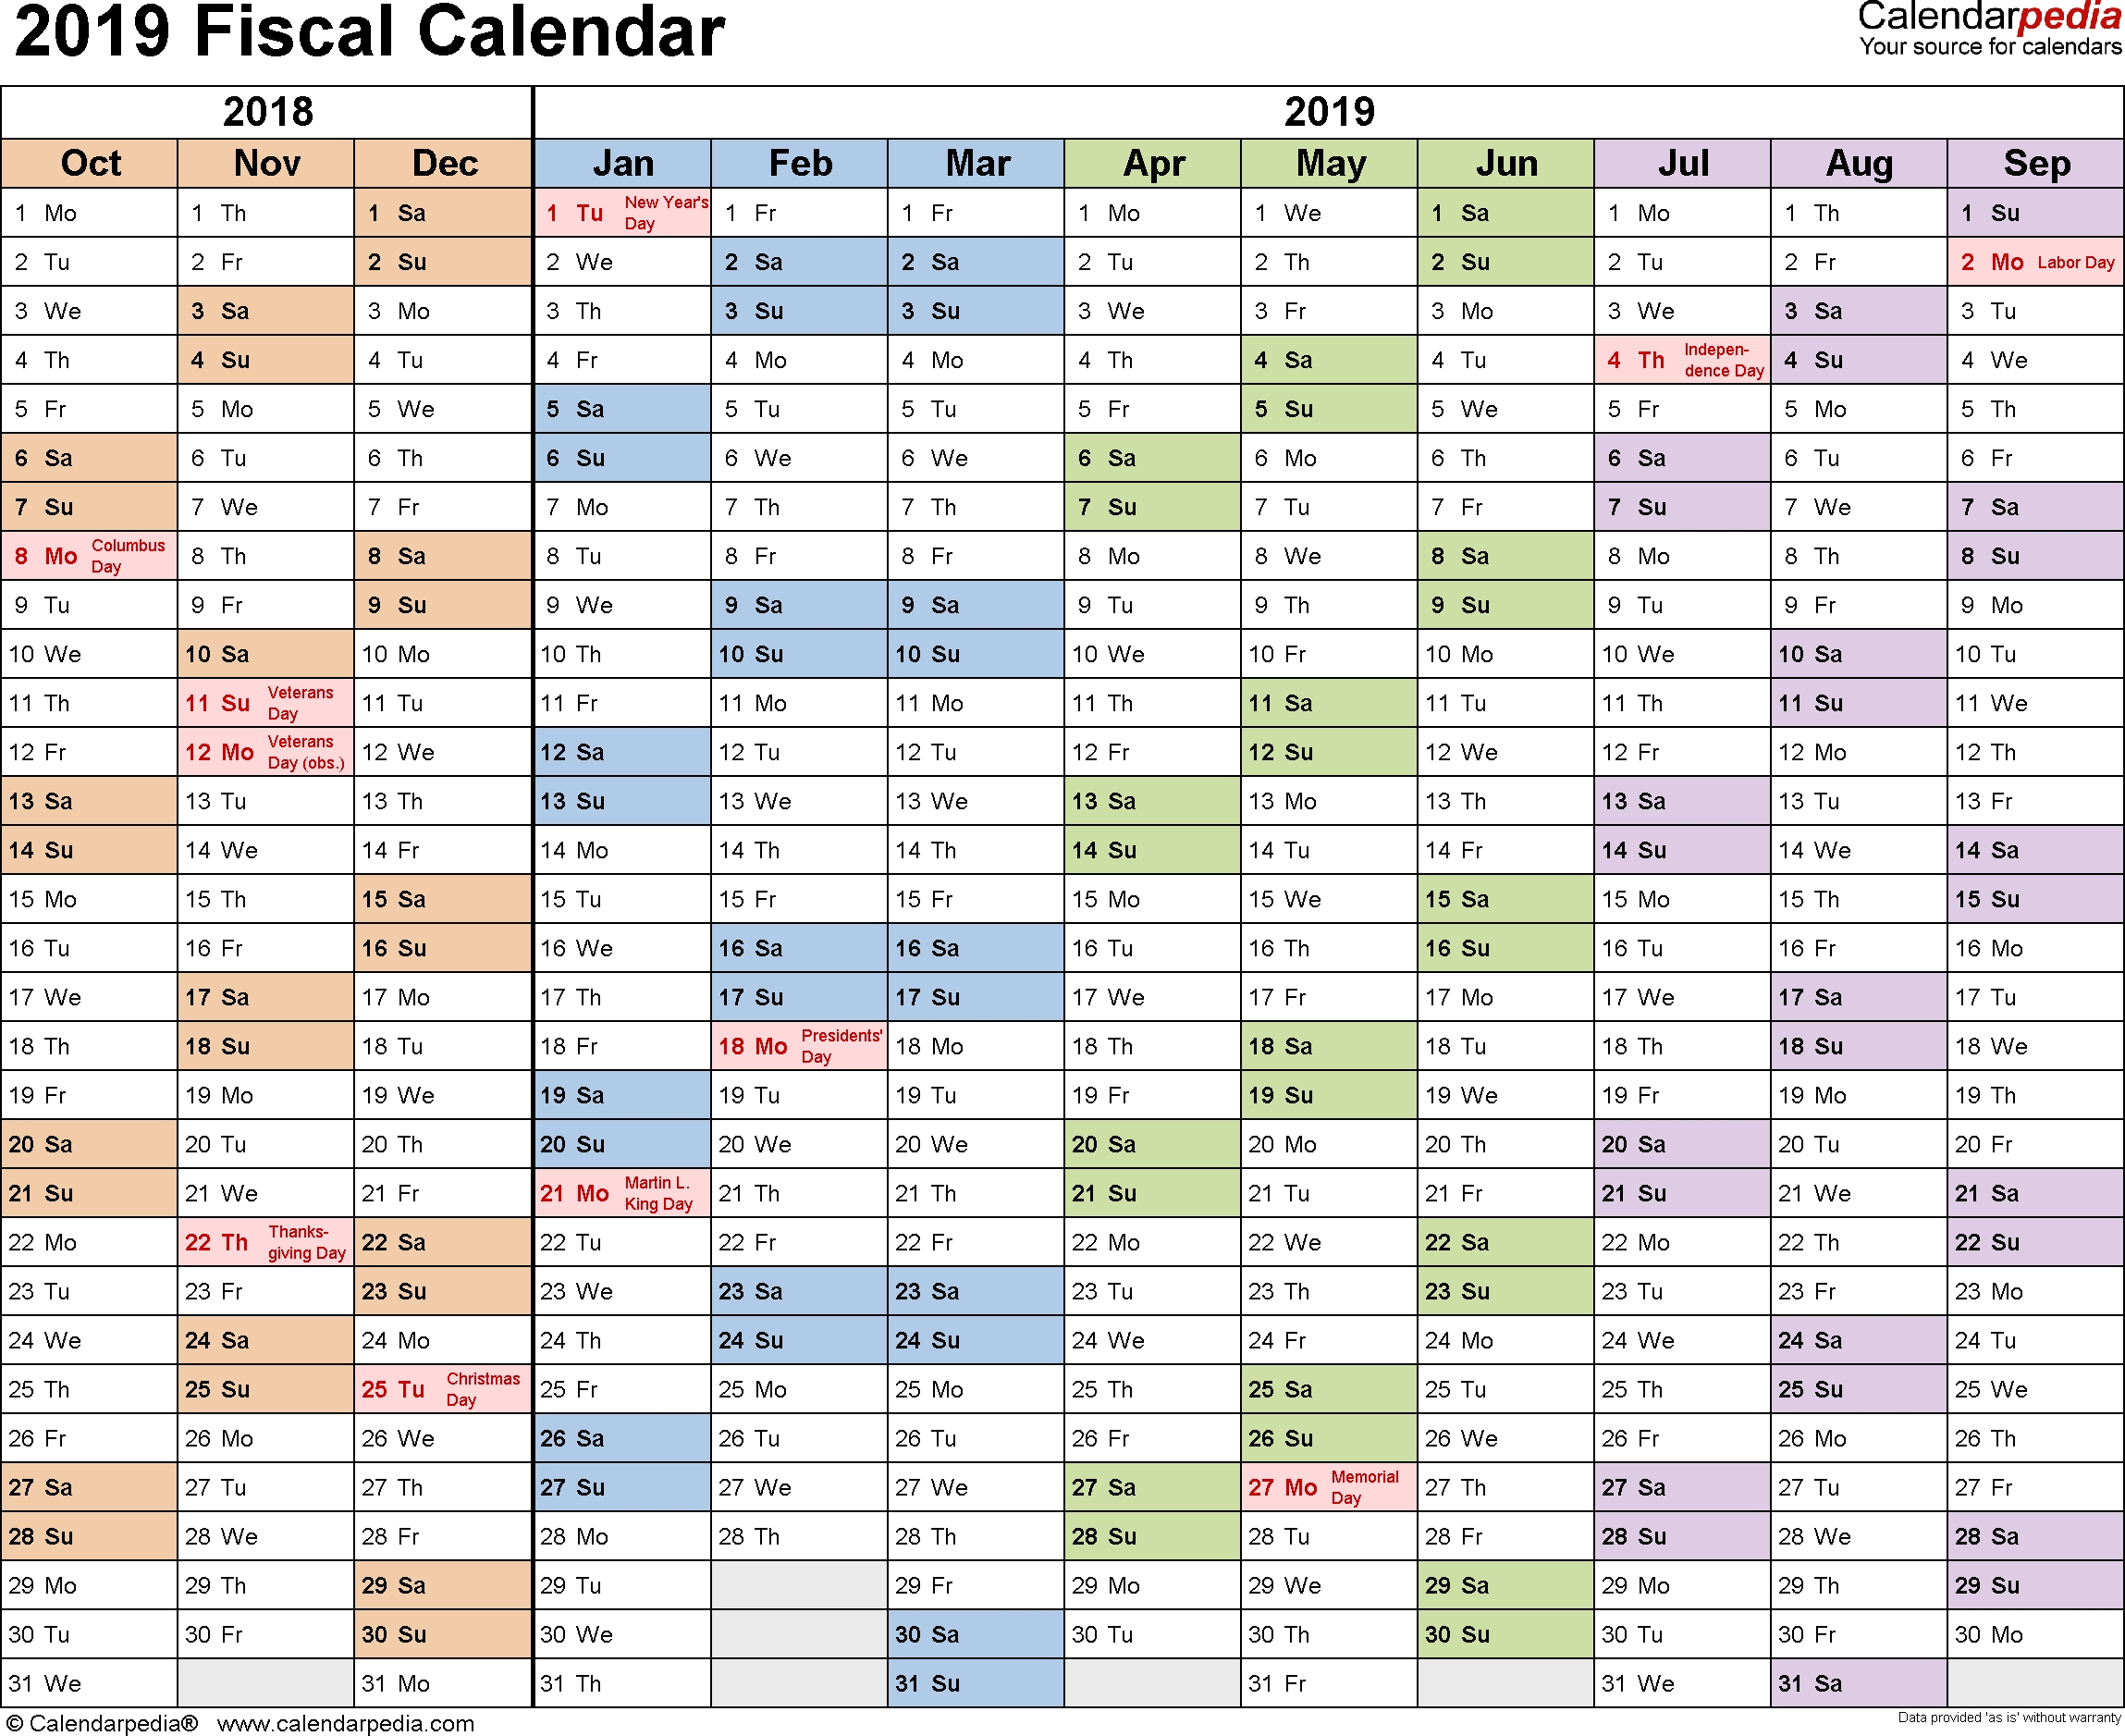 Fiscal Calendars 2019 - Free Printable Excel Templates pertaining to Lateral Printable Calendar 2019-2020